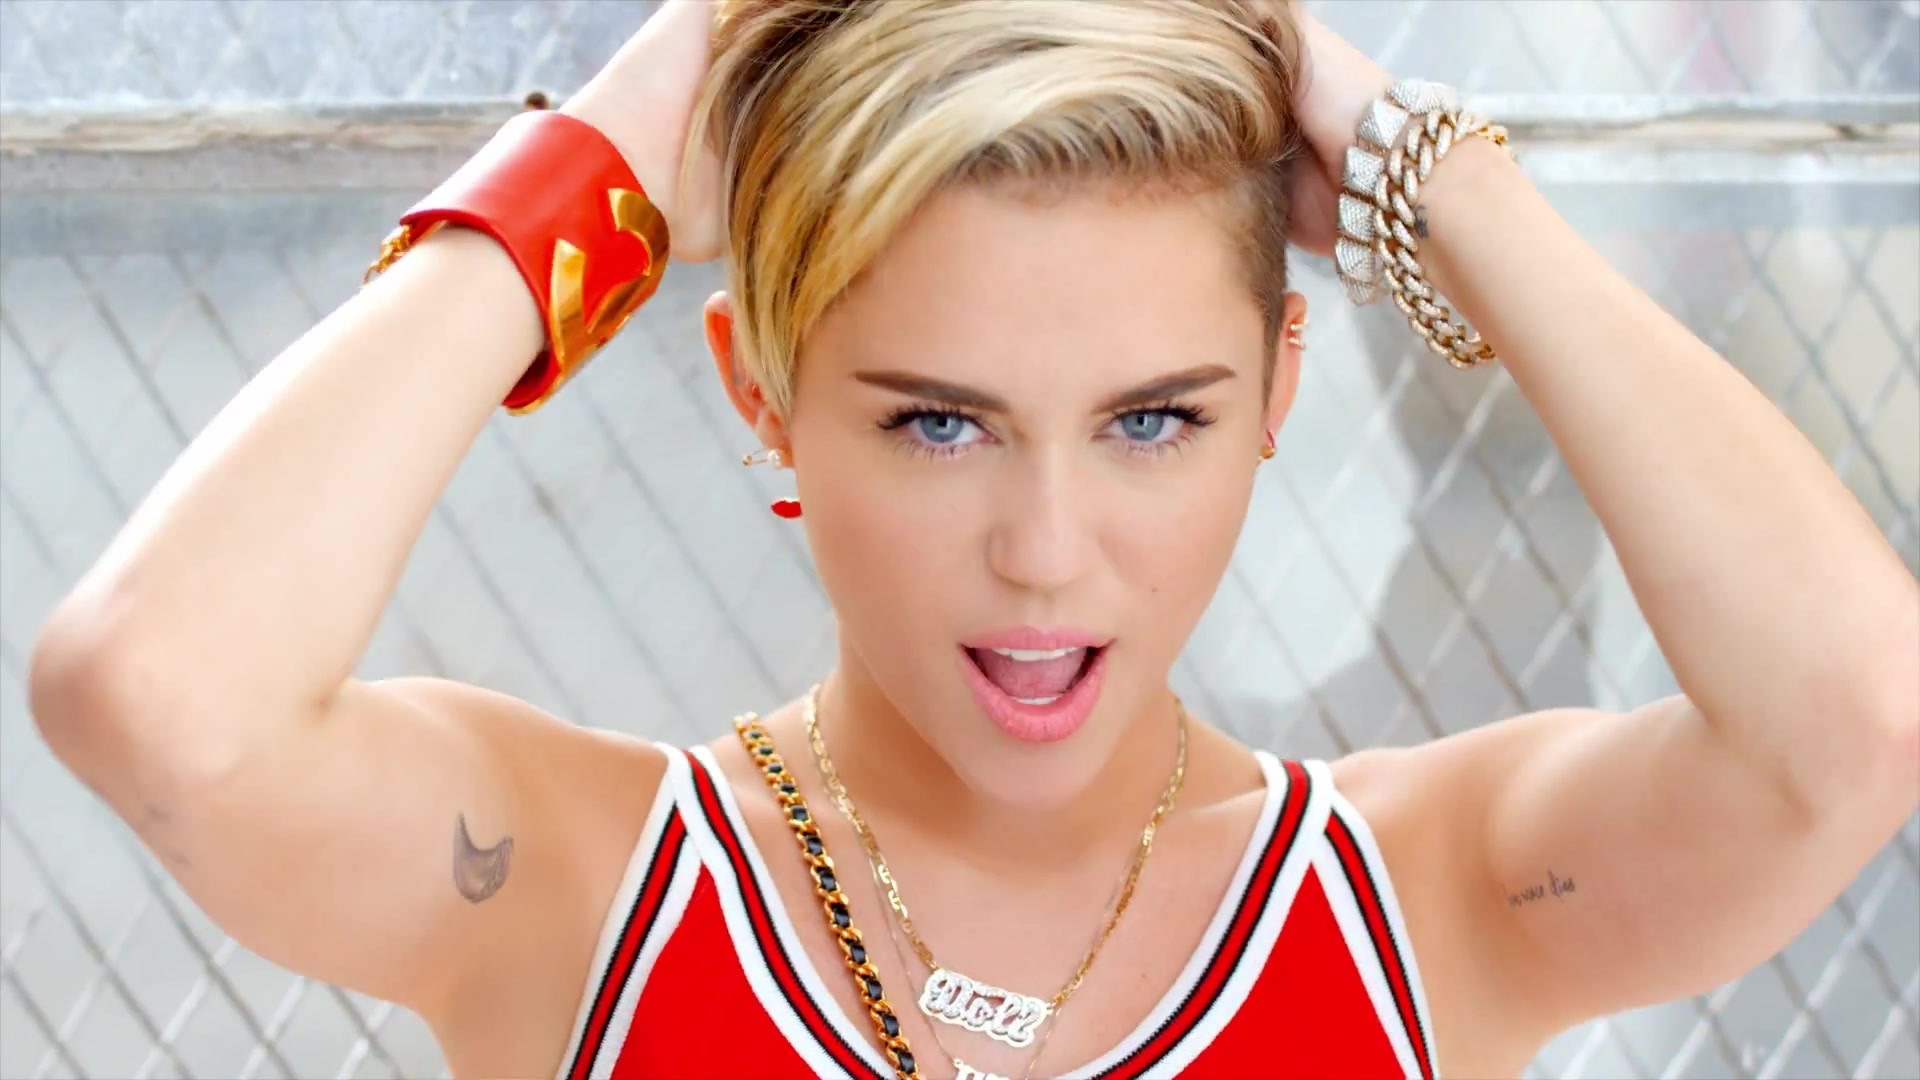 Miley Cyrus wallpaper  Celebrity wallpapers  4400